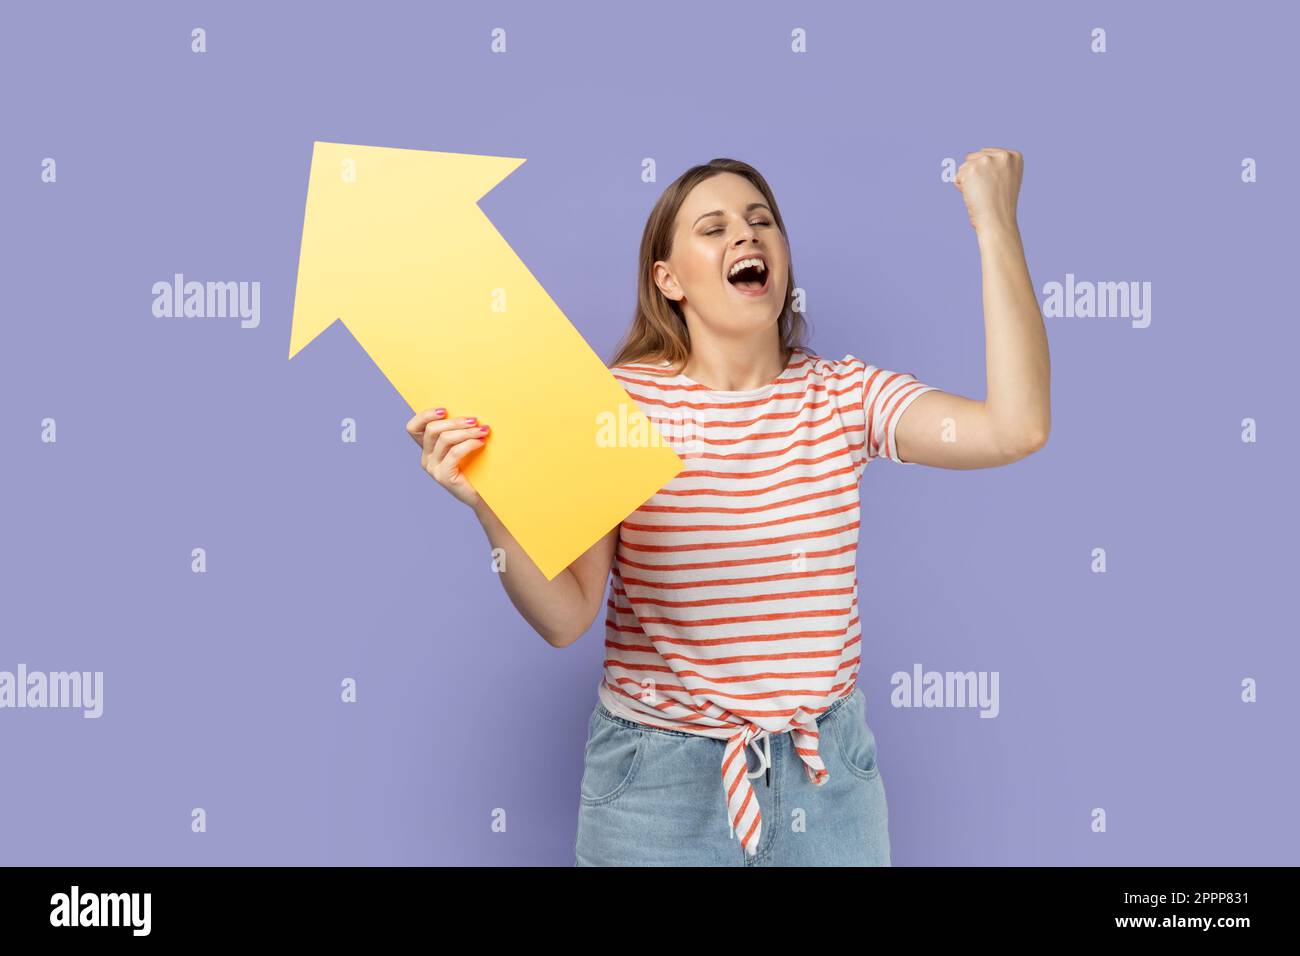 Portrait of extremely happy woman wearing striped T-shirt holding big yellow arrow pointing aside and clenched fist, celebrating victory, increase. Indoor studio shot isolated on purple background. Stock Photo